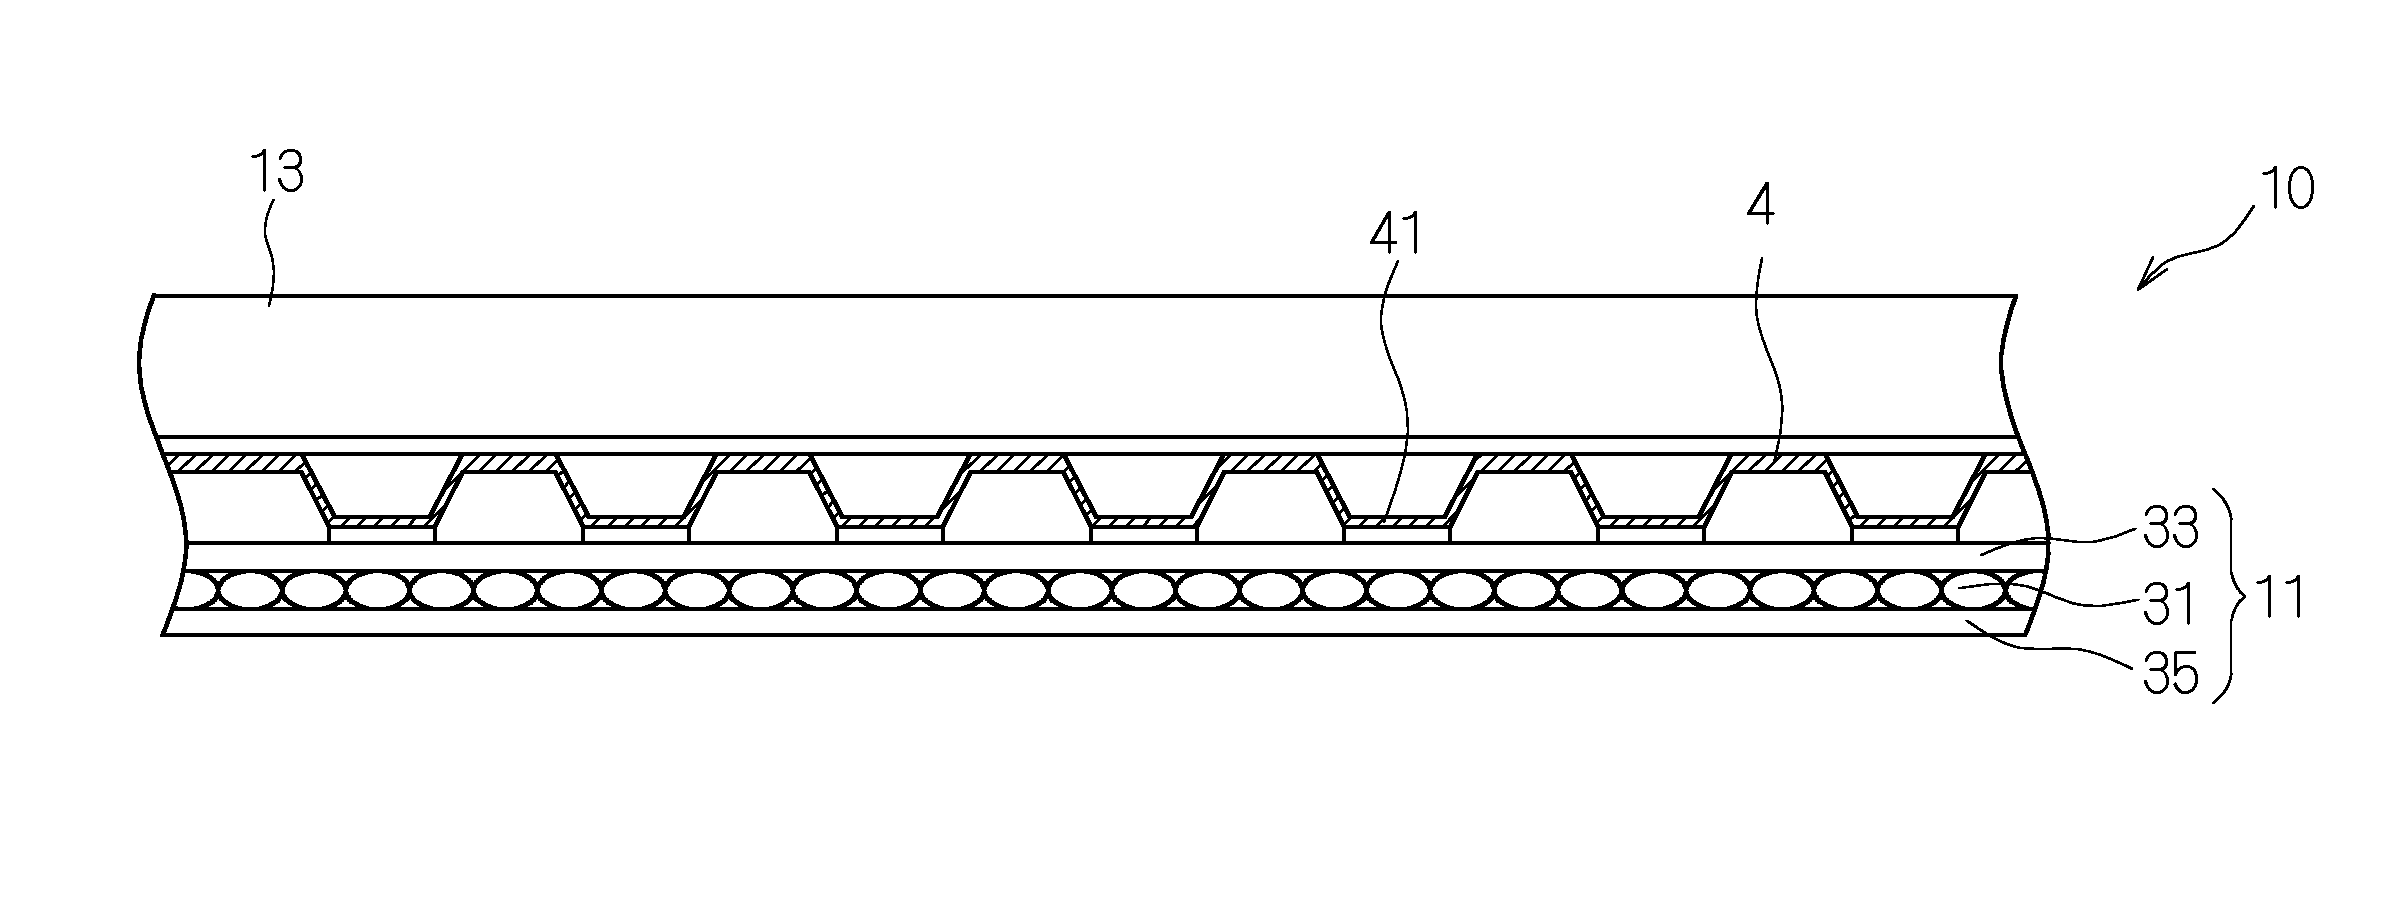 Luminous array film-type display device and luminous array multifilm-type display device